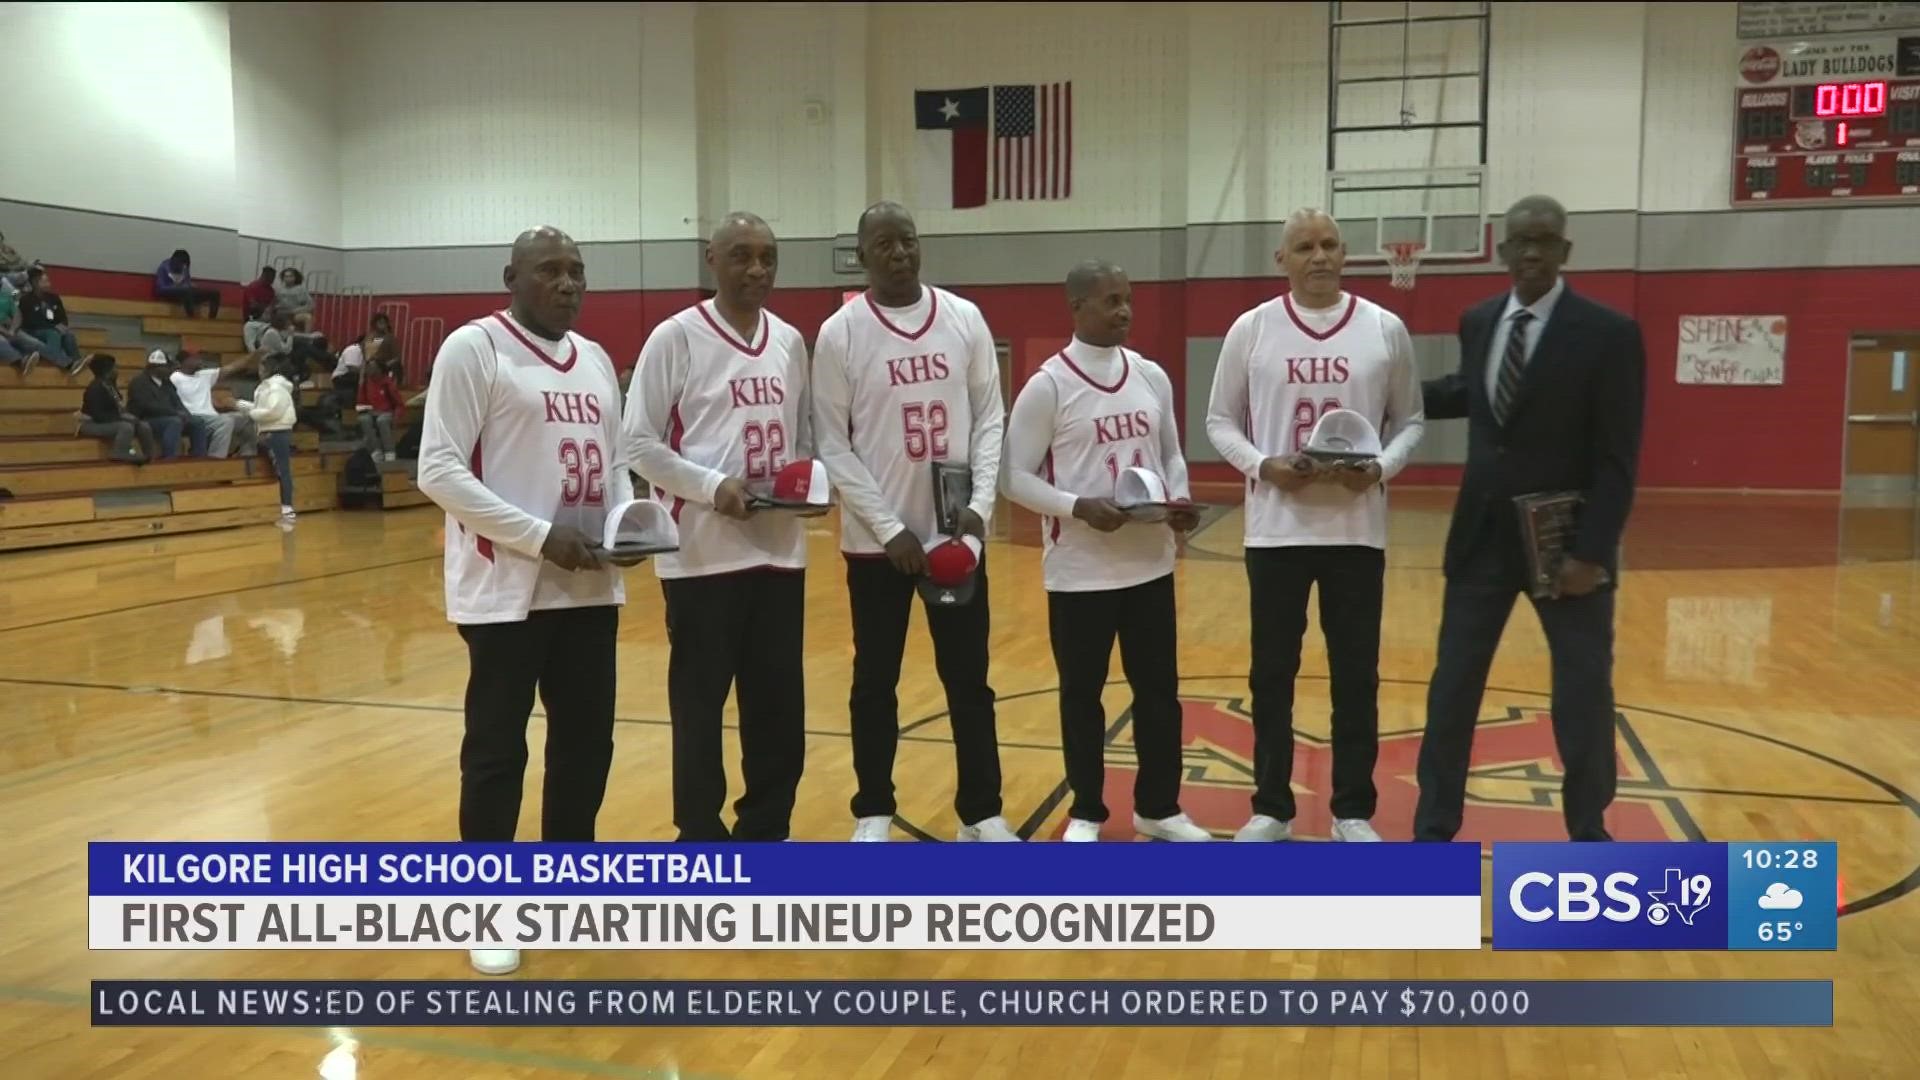 50 years of friendship and 50 years ago, this friendship made history for being the first all-black starting line up in the history of Kilgore High School in 1973.